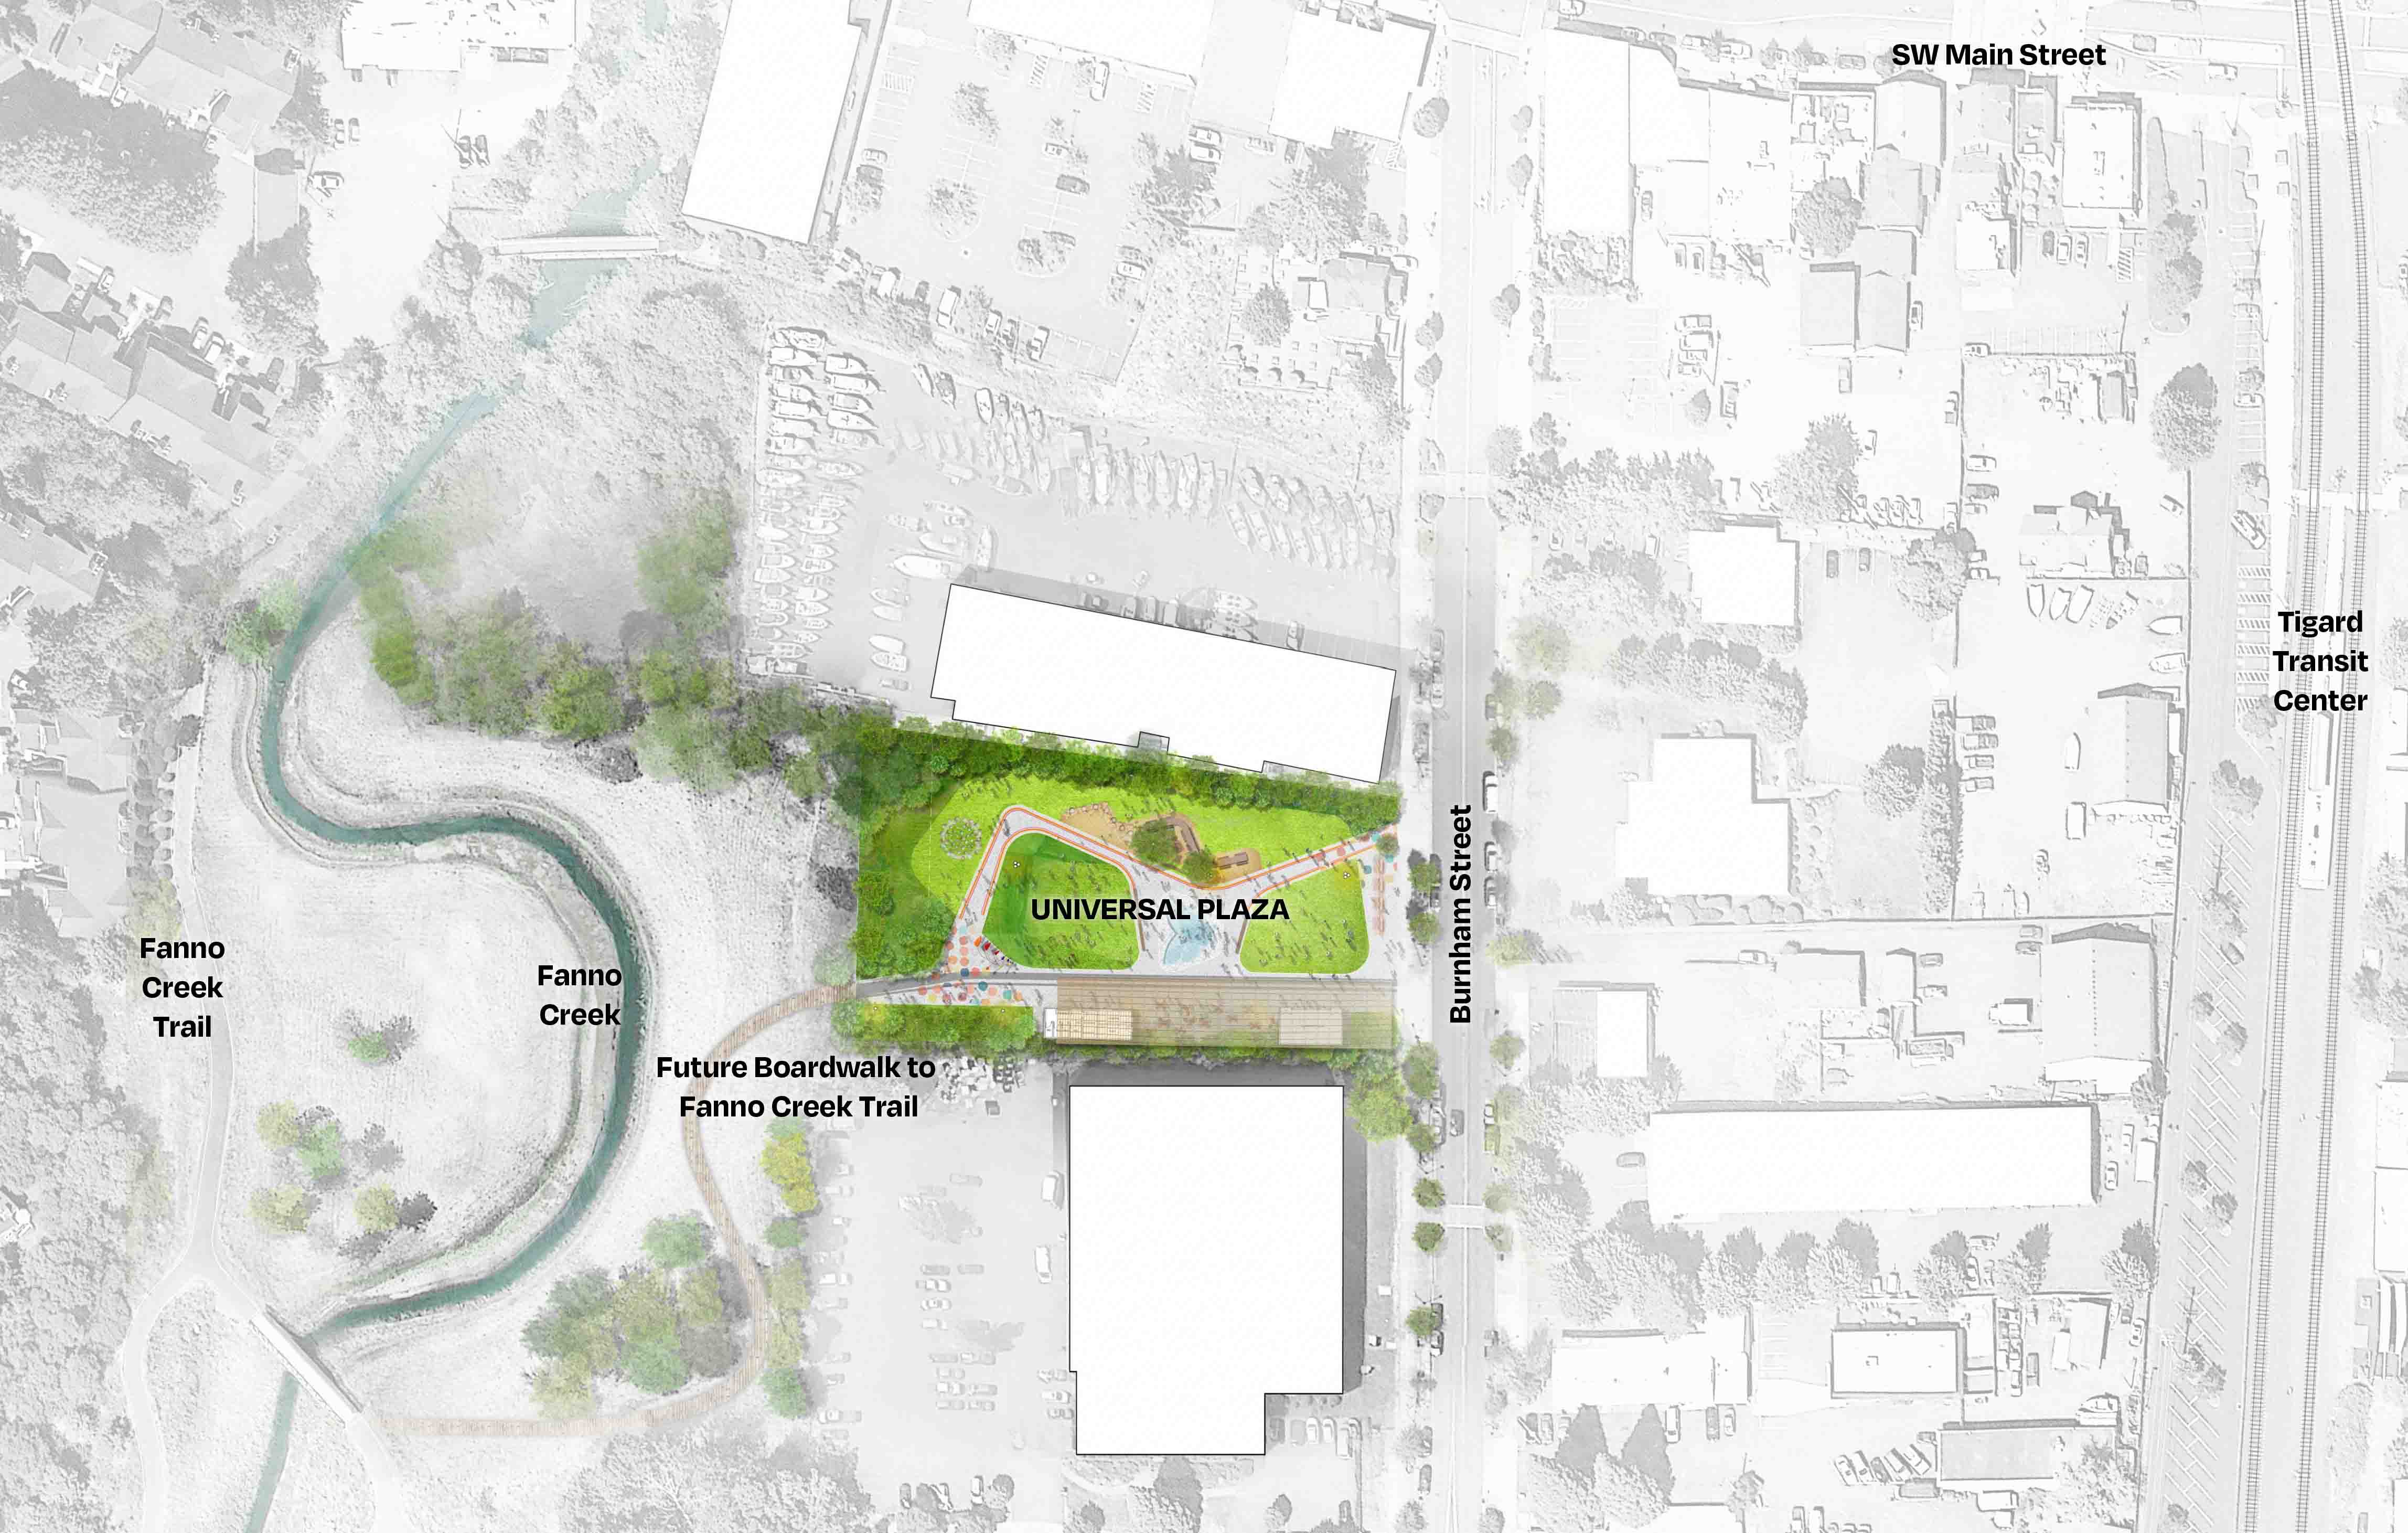 Universal Plaza site plan that represents connectivity between downtown, the transit center, and Fanno Creek Trail.